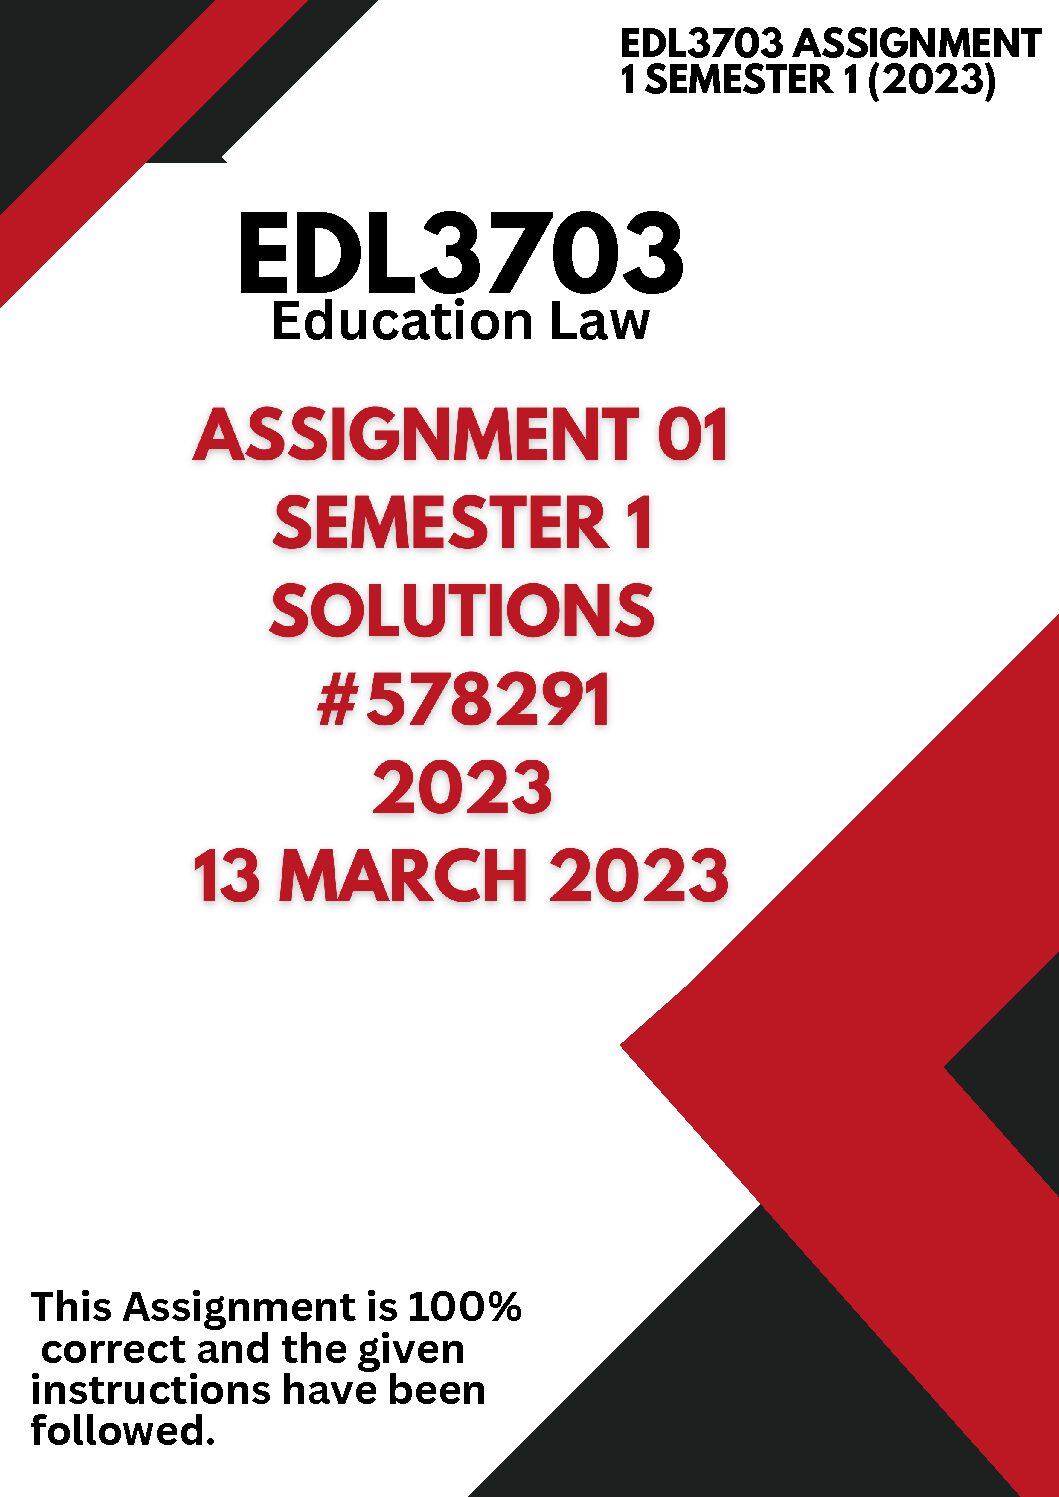 hfl1501 assignment 6 2023 answers